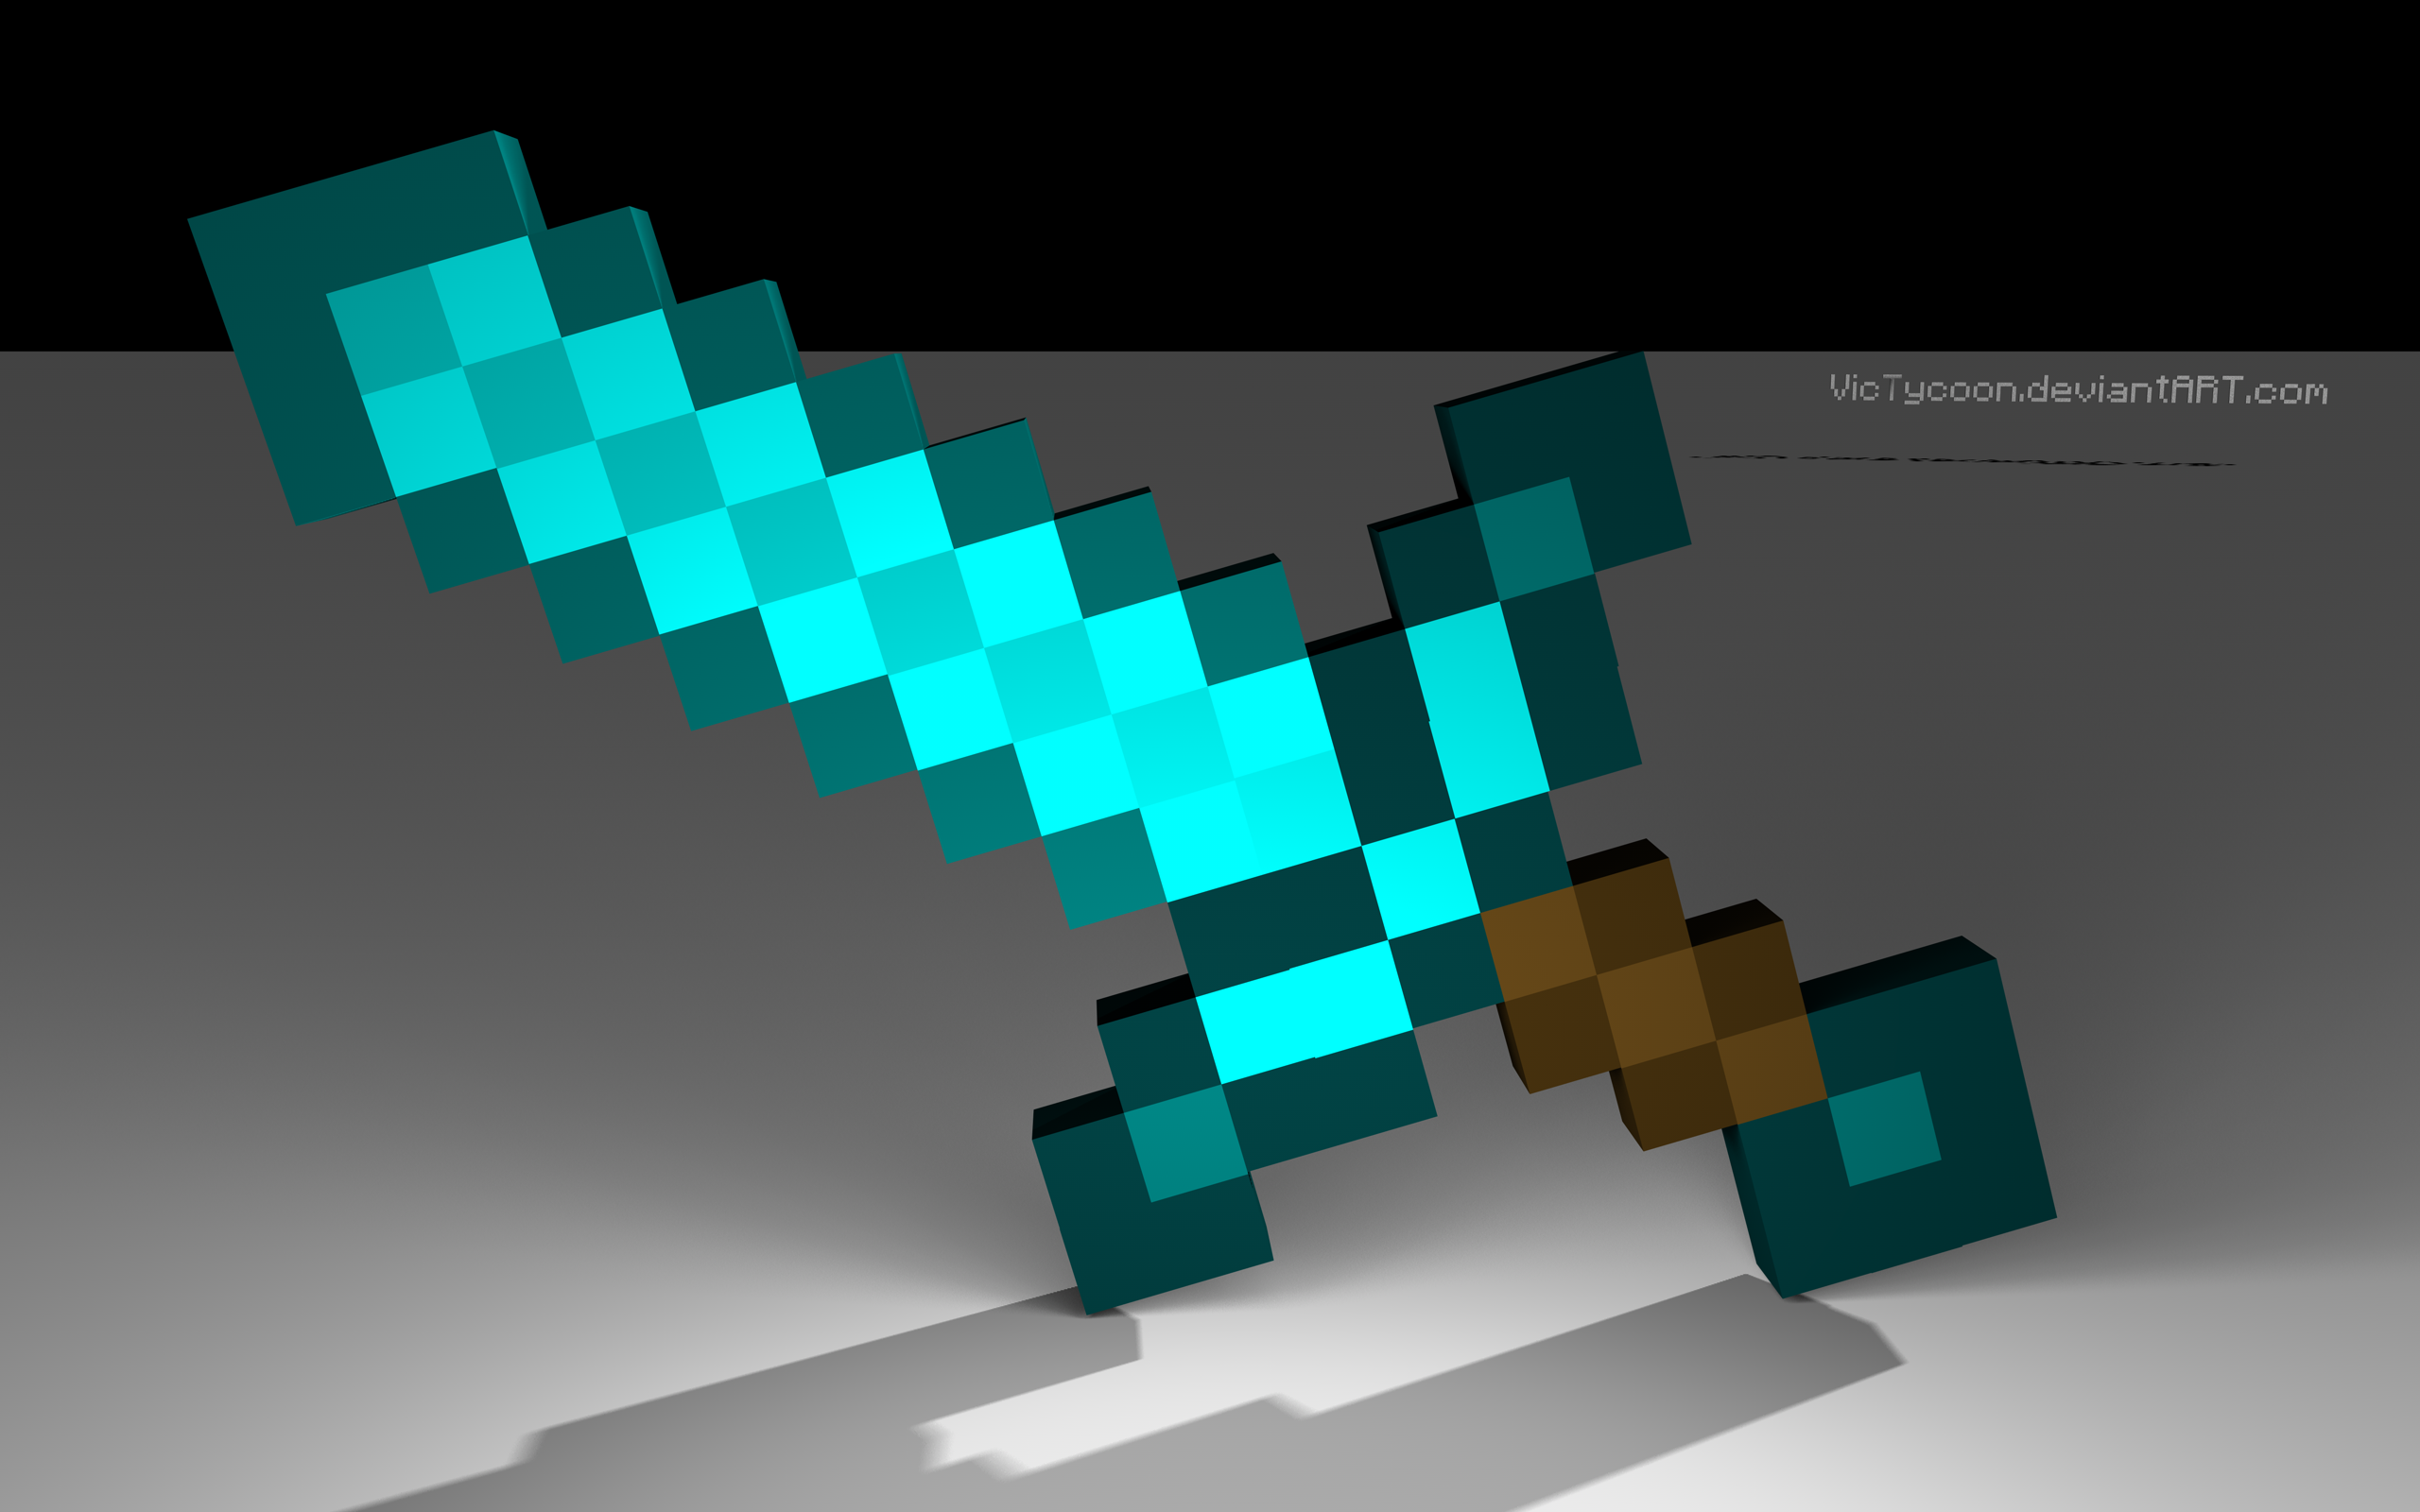 Minecraft Diamond Sword Wallpaper 5.png (2560×1600) For The Minecraft Wall. Minecraft Sword, Minecraft Diamond Sword, Minecraft Wall